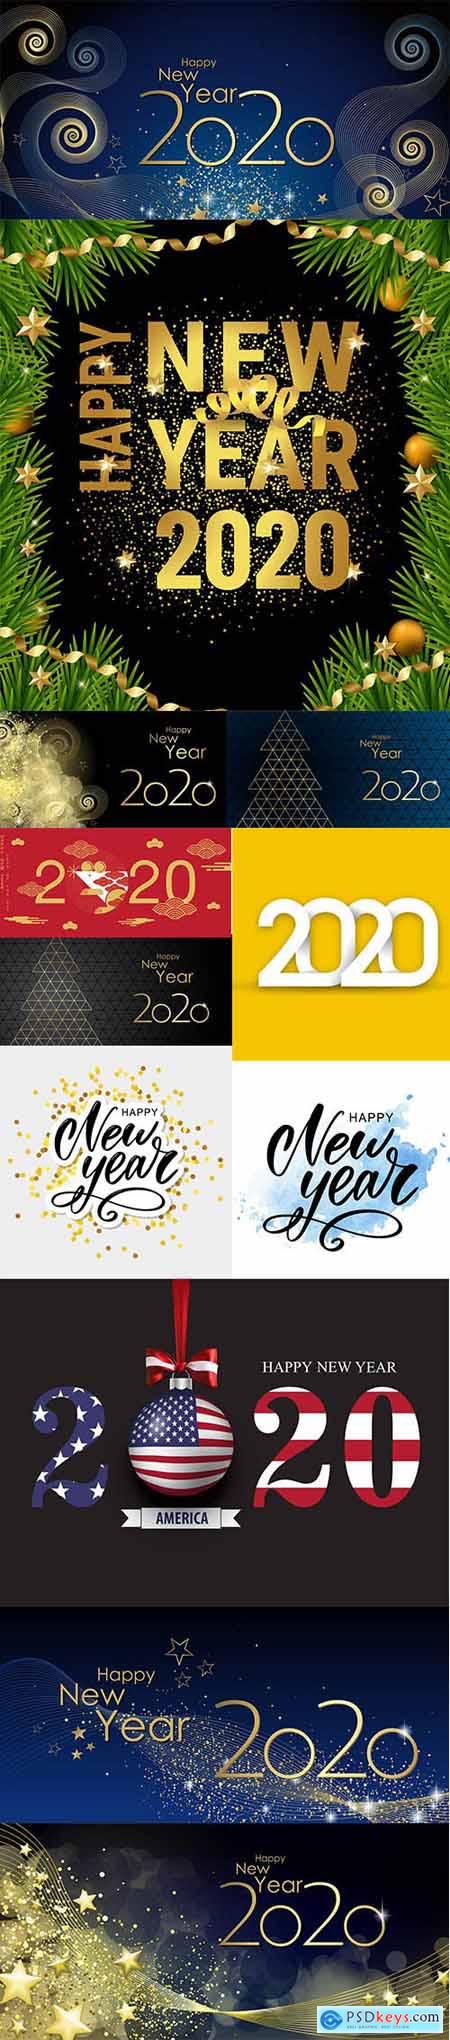 Merry Christmas and Happy New Year 2020 Illustrations Set 4